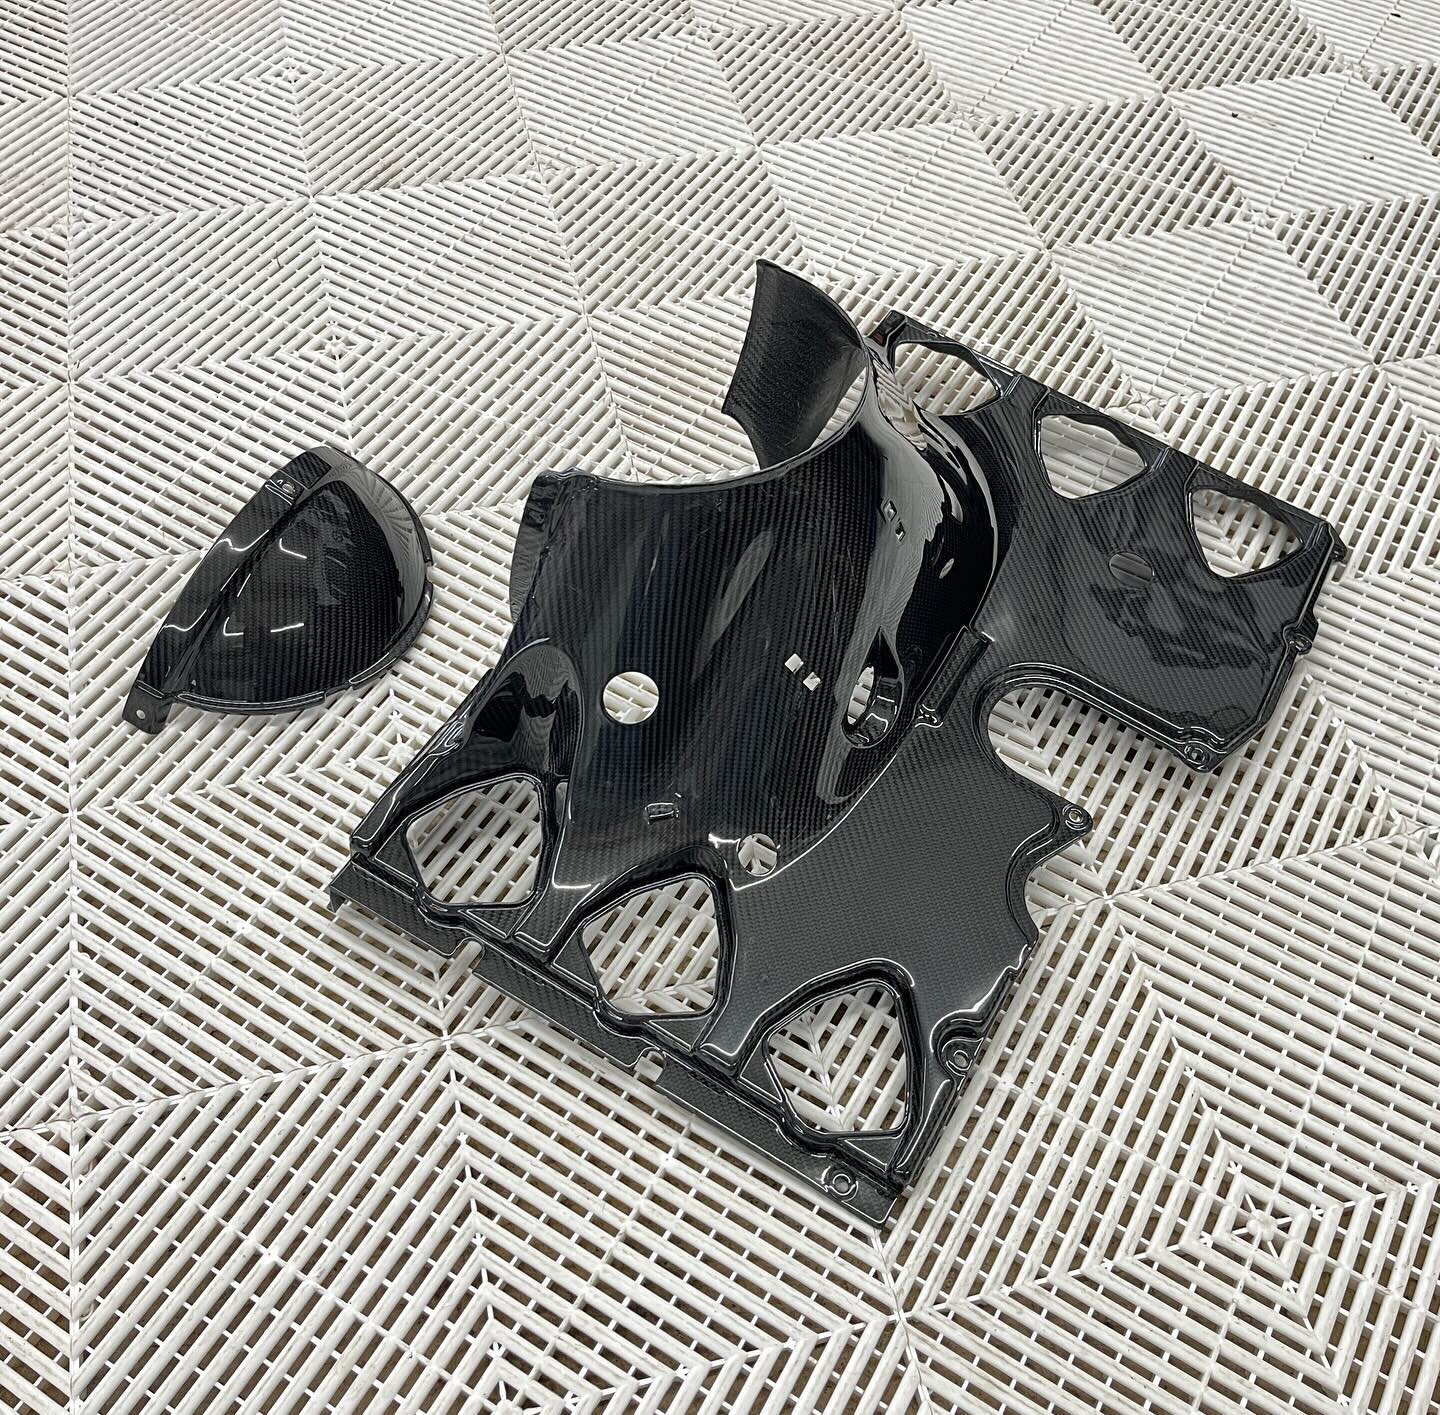 Full pre-preg carbon fibre engine tin wear for 964 and 993.  Available with or without the top heater block off piece.